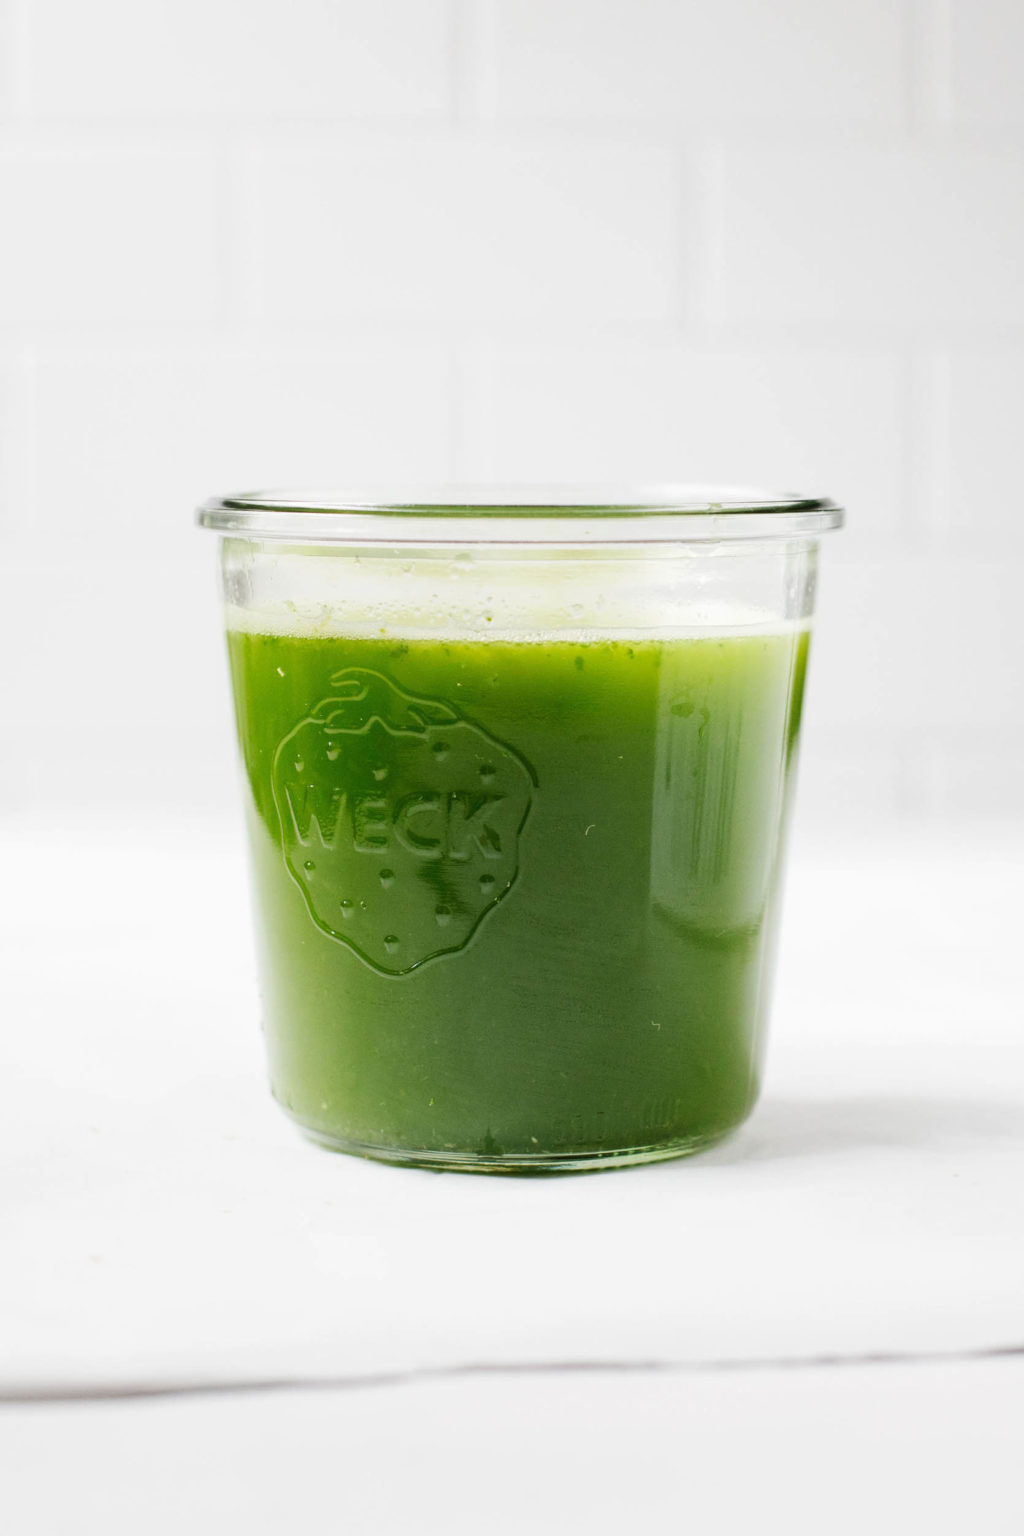 How To Make Green Juice in a Blender - This Savory Vegan